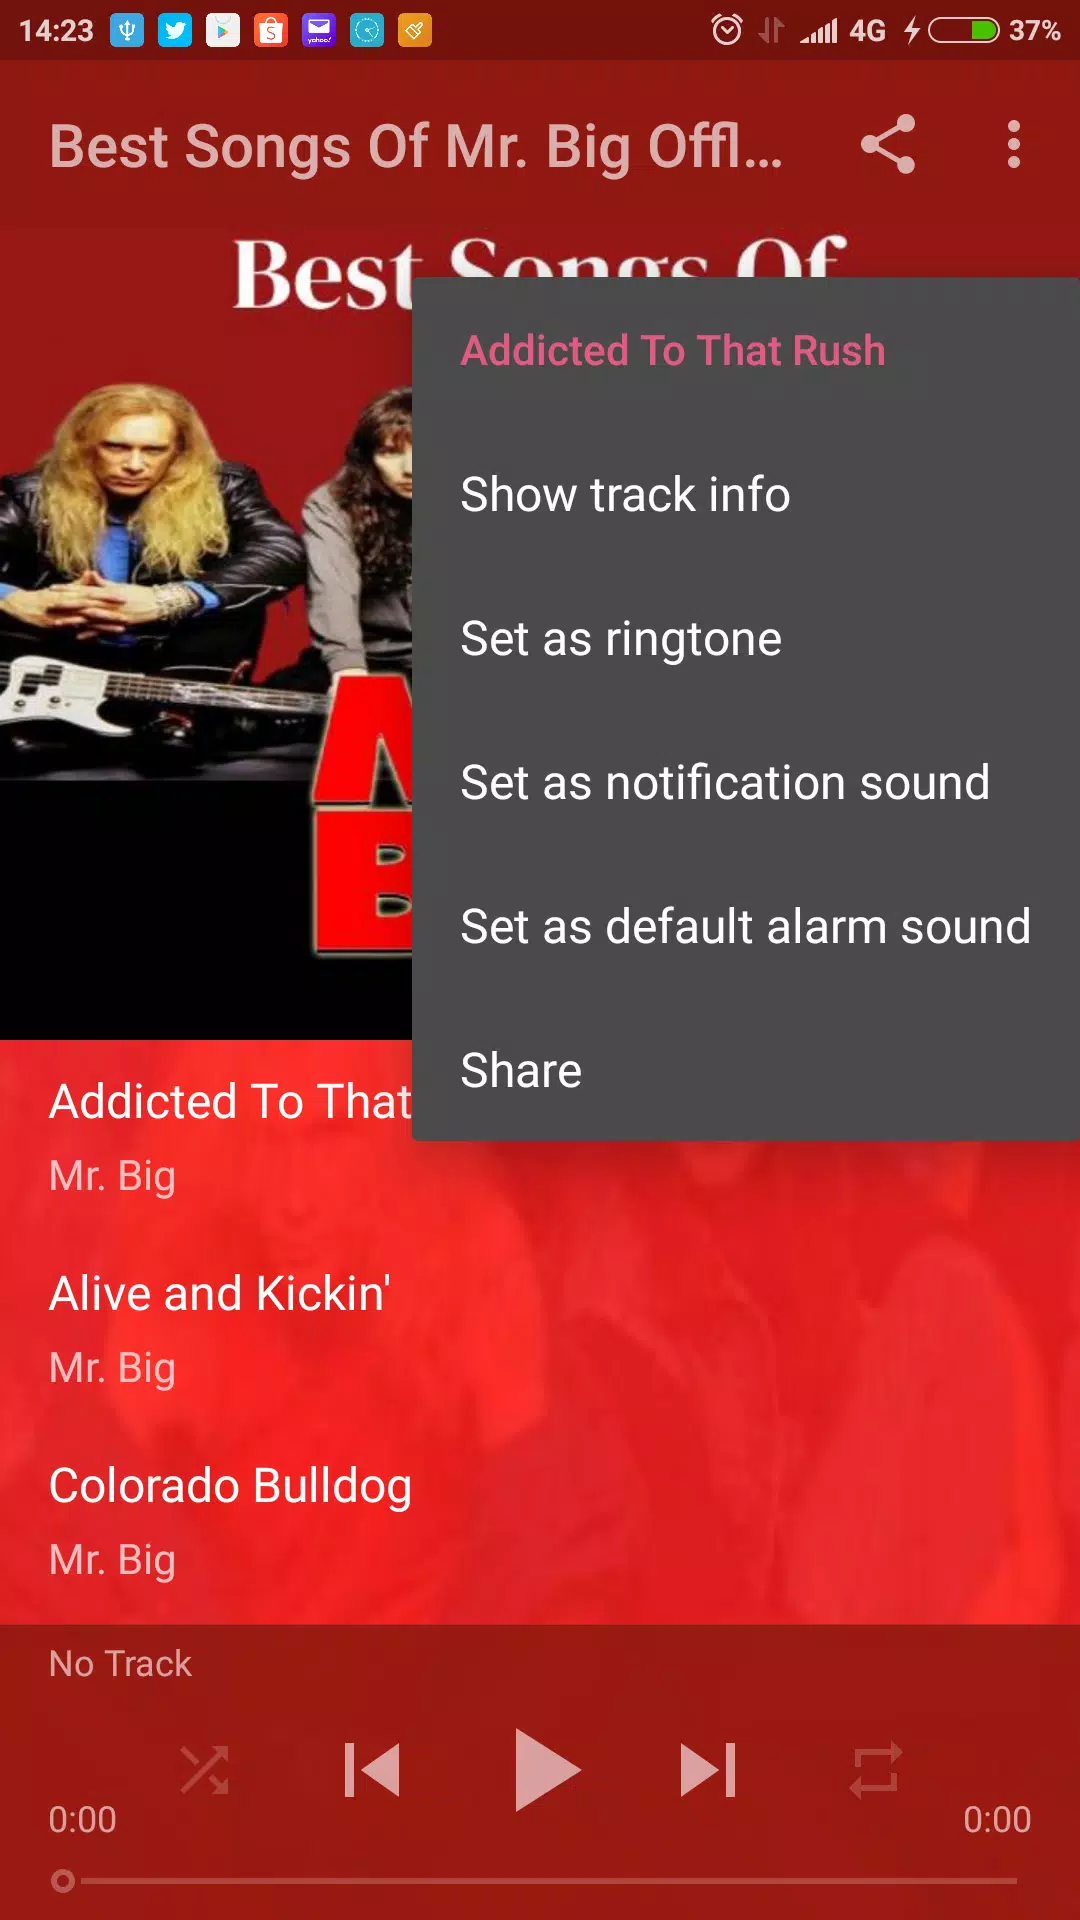 Best Songs Of Mr. Big Offline for Android - APK Download